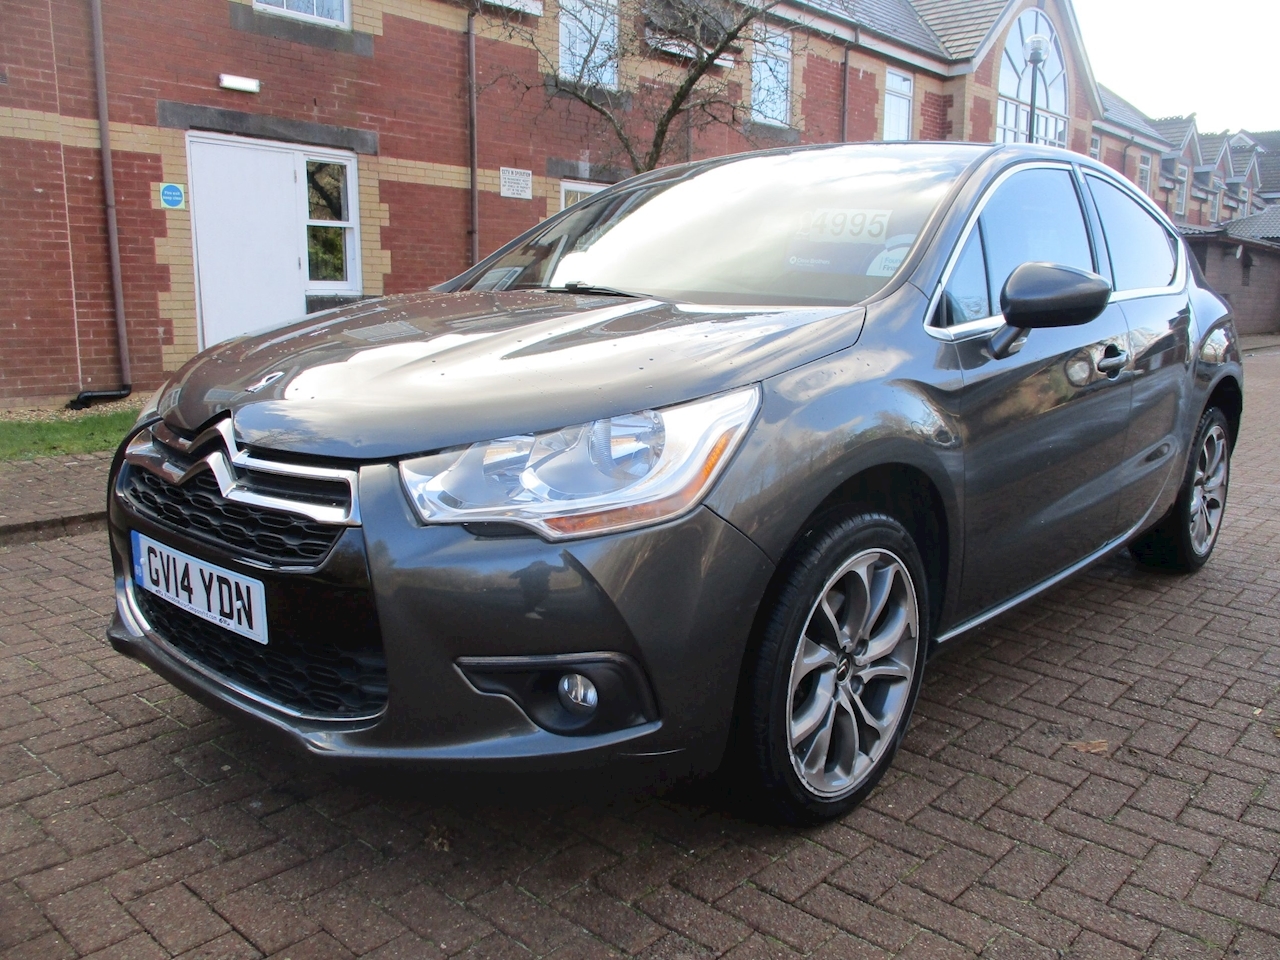 Ds4 Hdi Dstyle 2.0 5dr Hatchback Manual Diesel